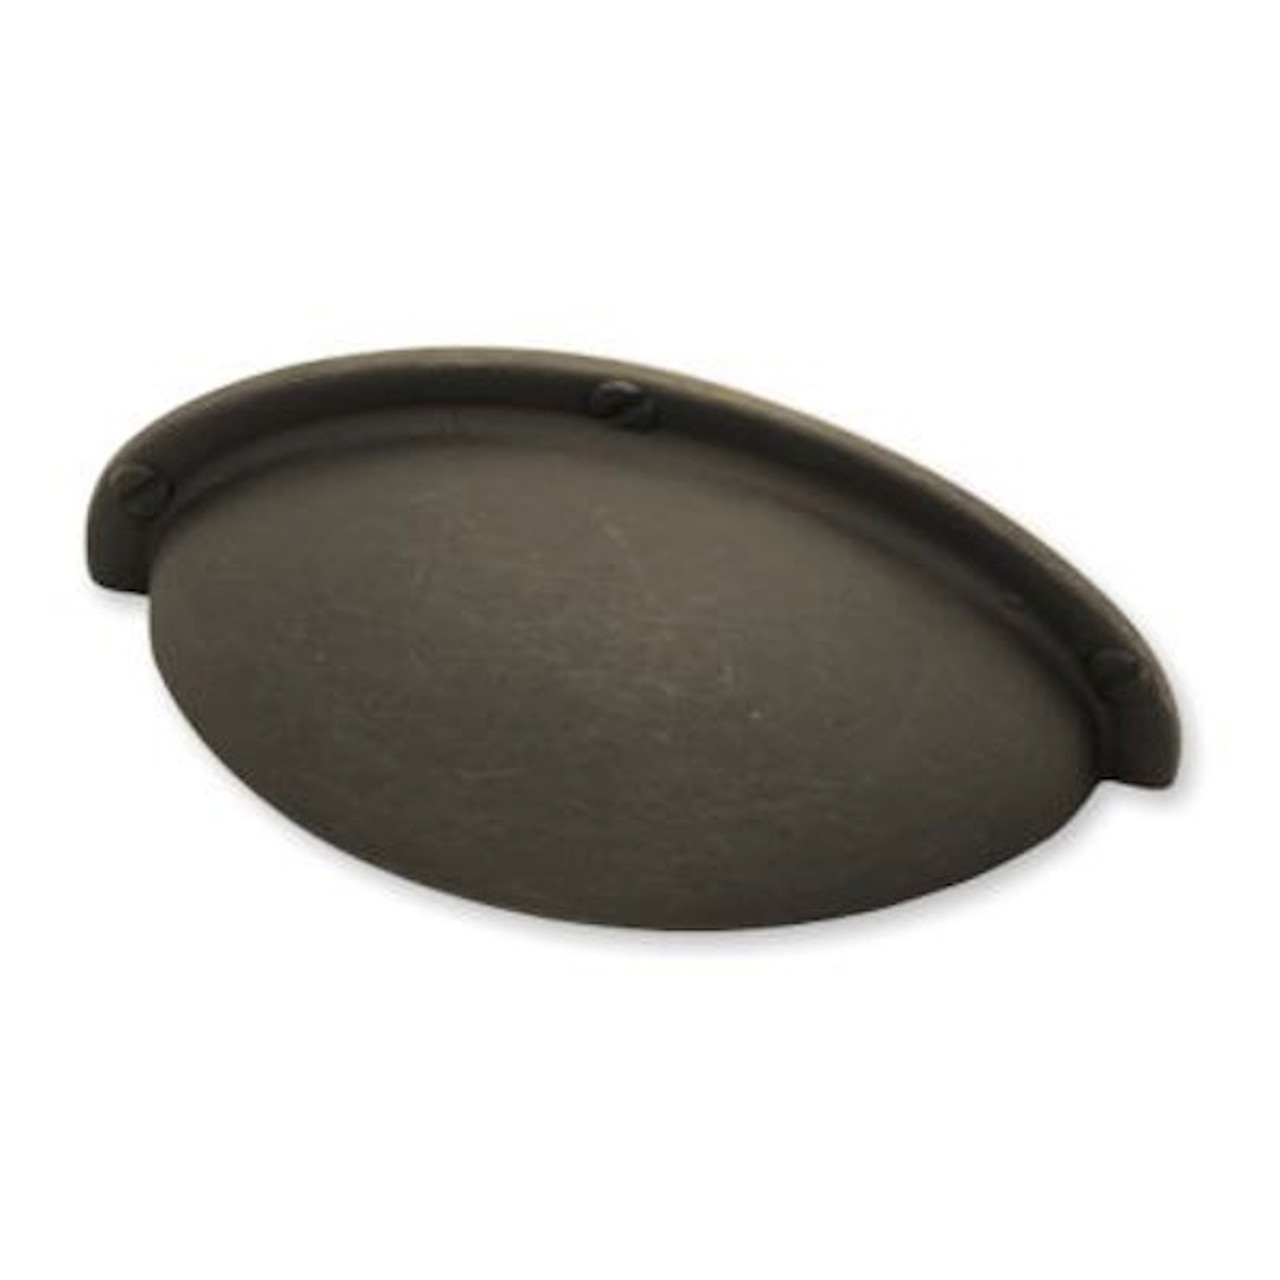 PN0601V-OB3 Oil Rubbed Bronze Davidson 2 1/2" Cup Style Cabinet Drawer Pull